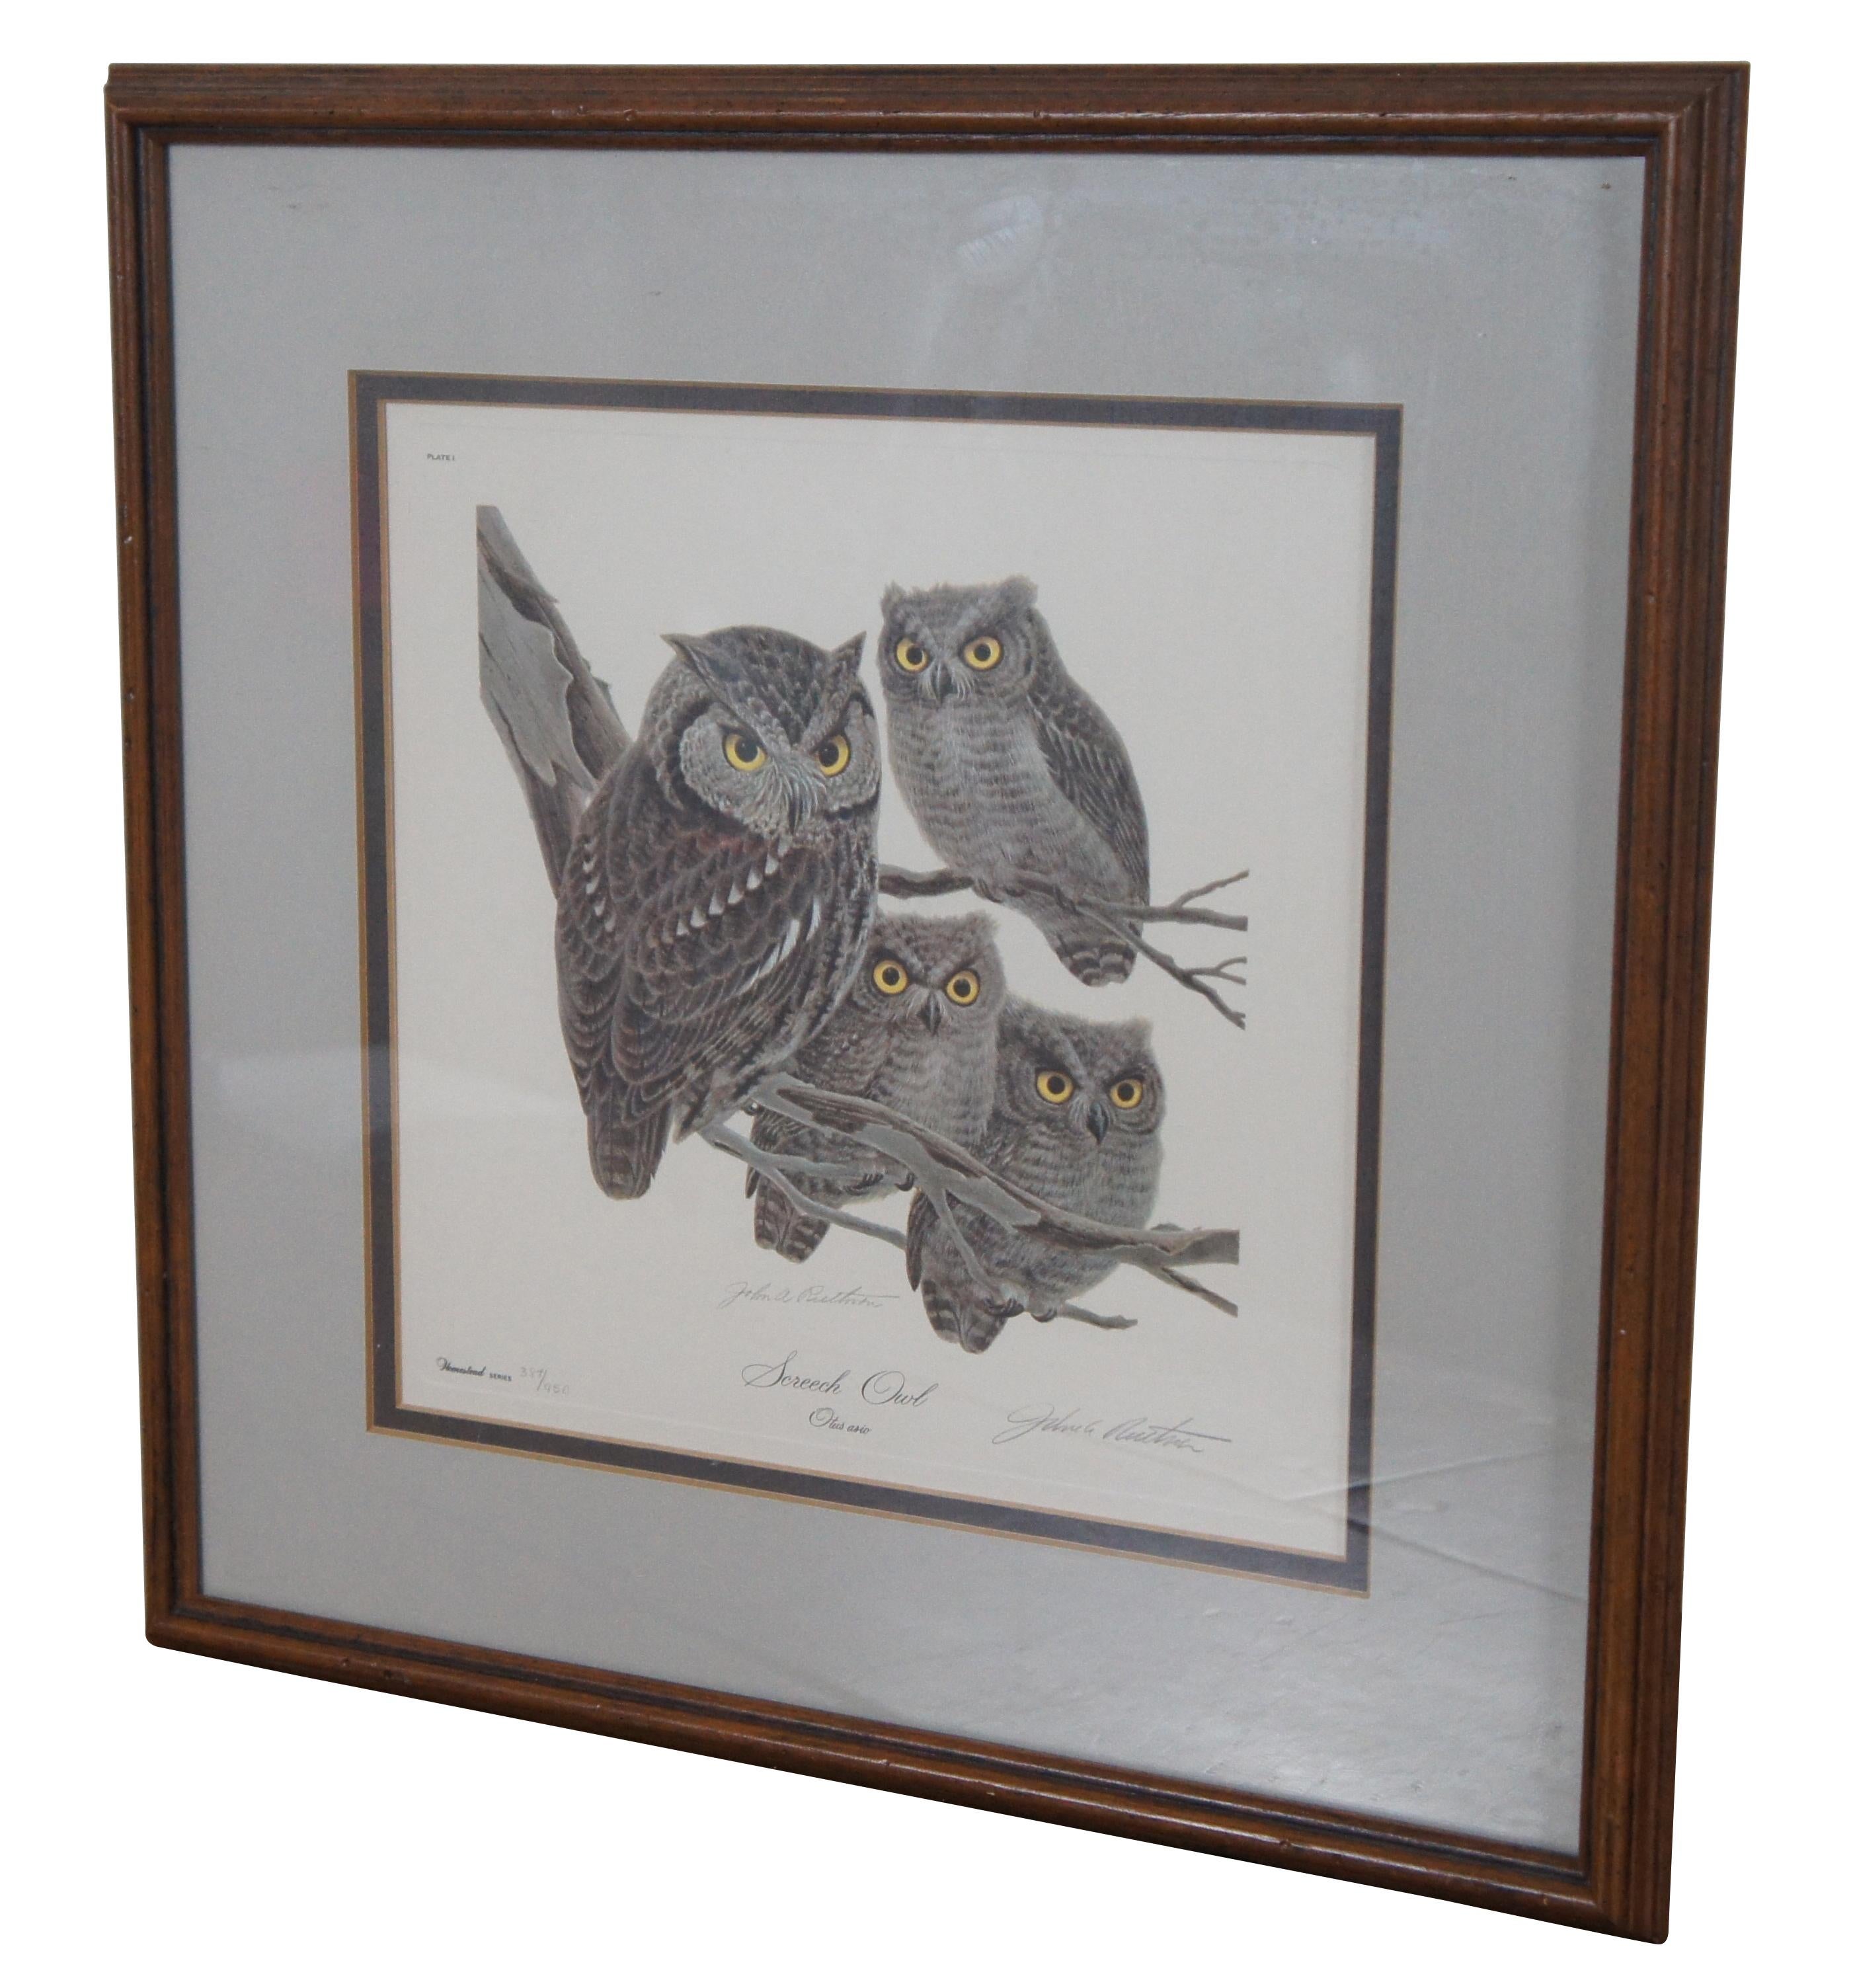 Vintage framed lithograph print of Screech Owl (Otus asio) – Plate 1 No. 387 from the Homestead Series by John A. Ruthven. Pencil signed and numbered 387/950.

“John Aldrich Ruthven (November 12, 1924 – October 11, 2020) was an American artist best